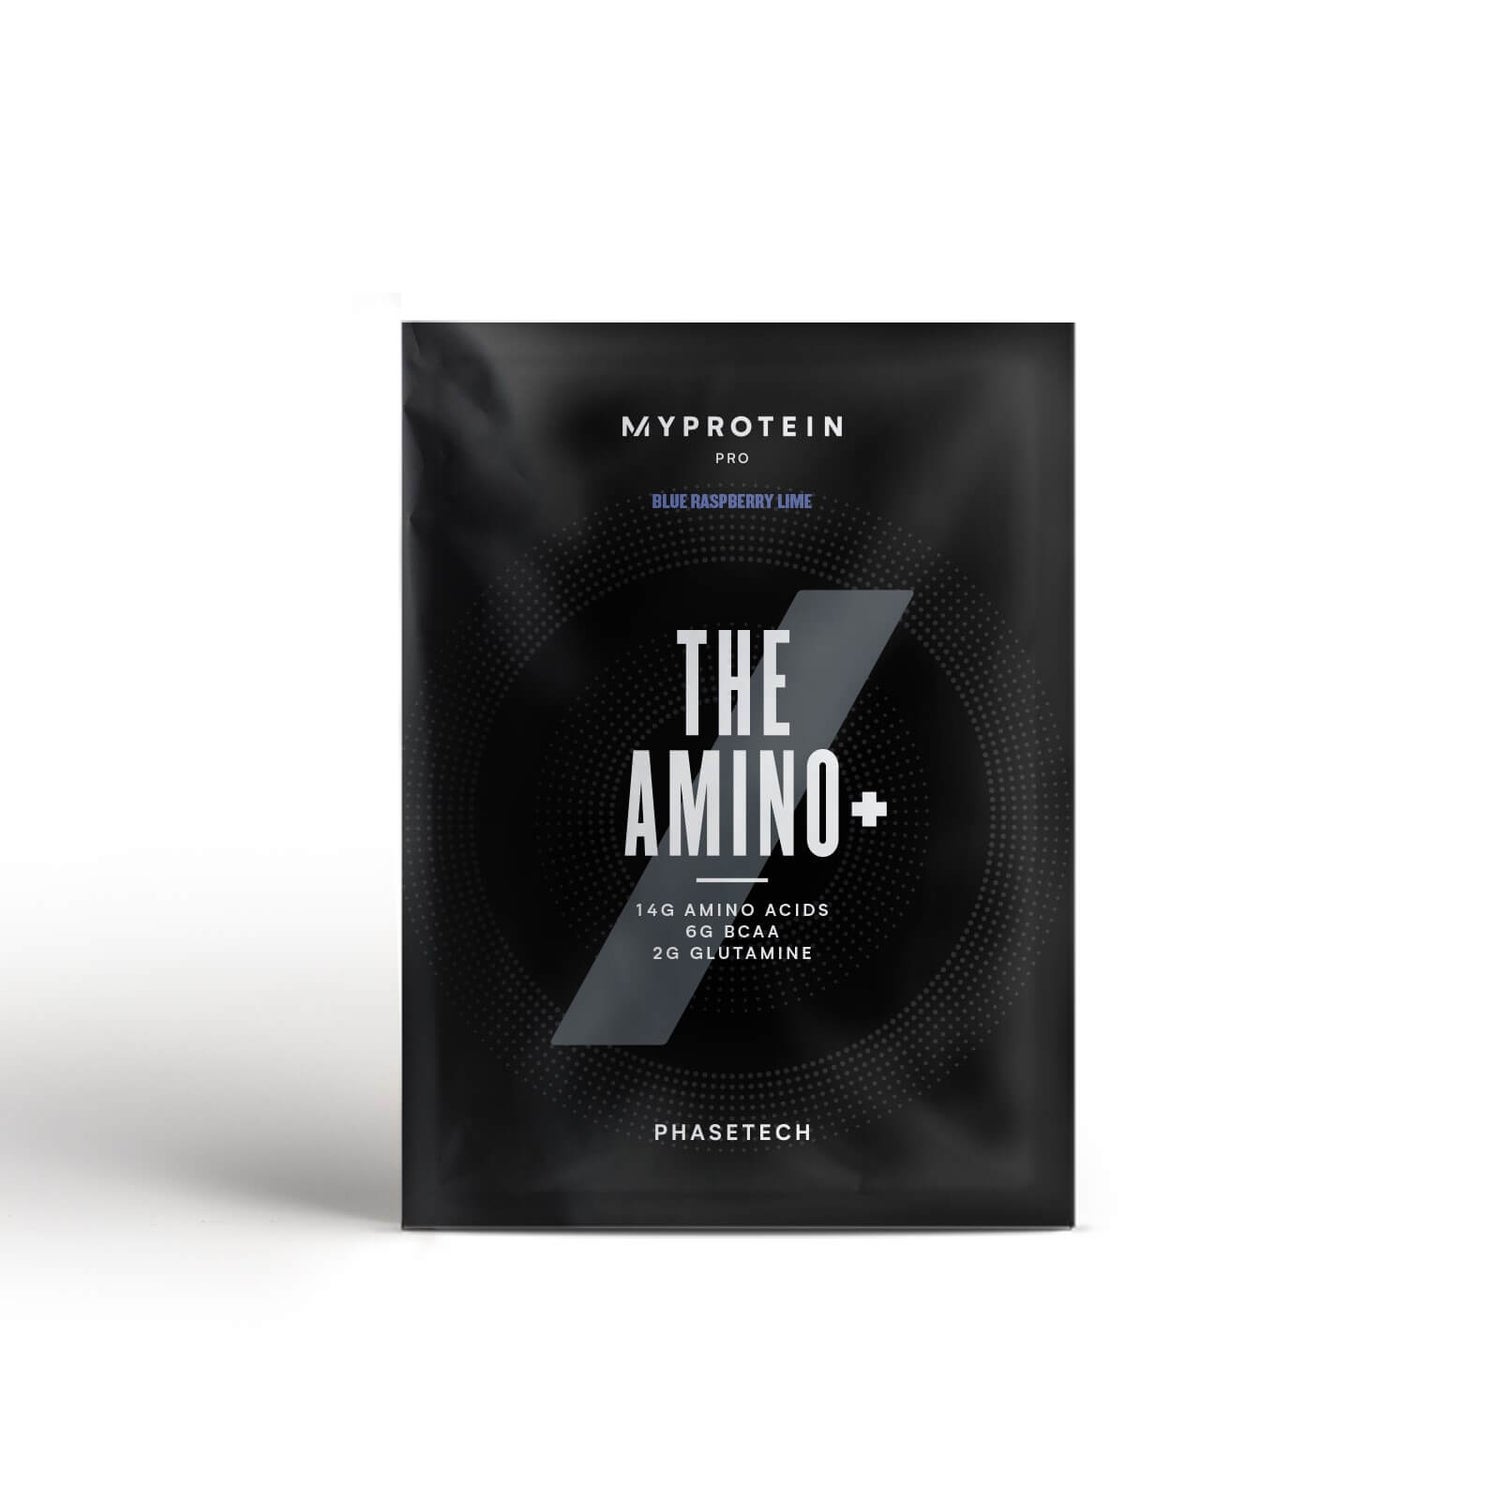 THE Amino+ (paraugs) - Ogas